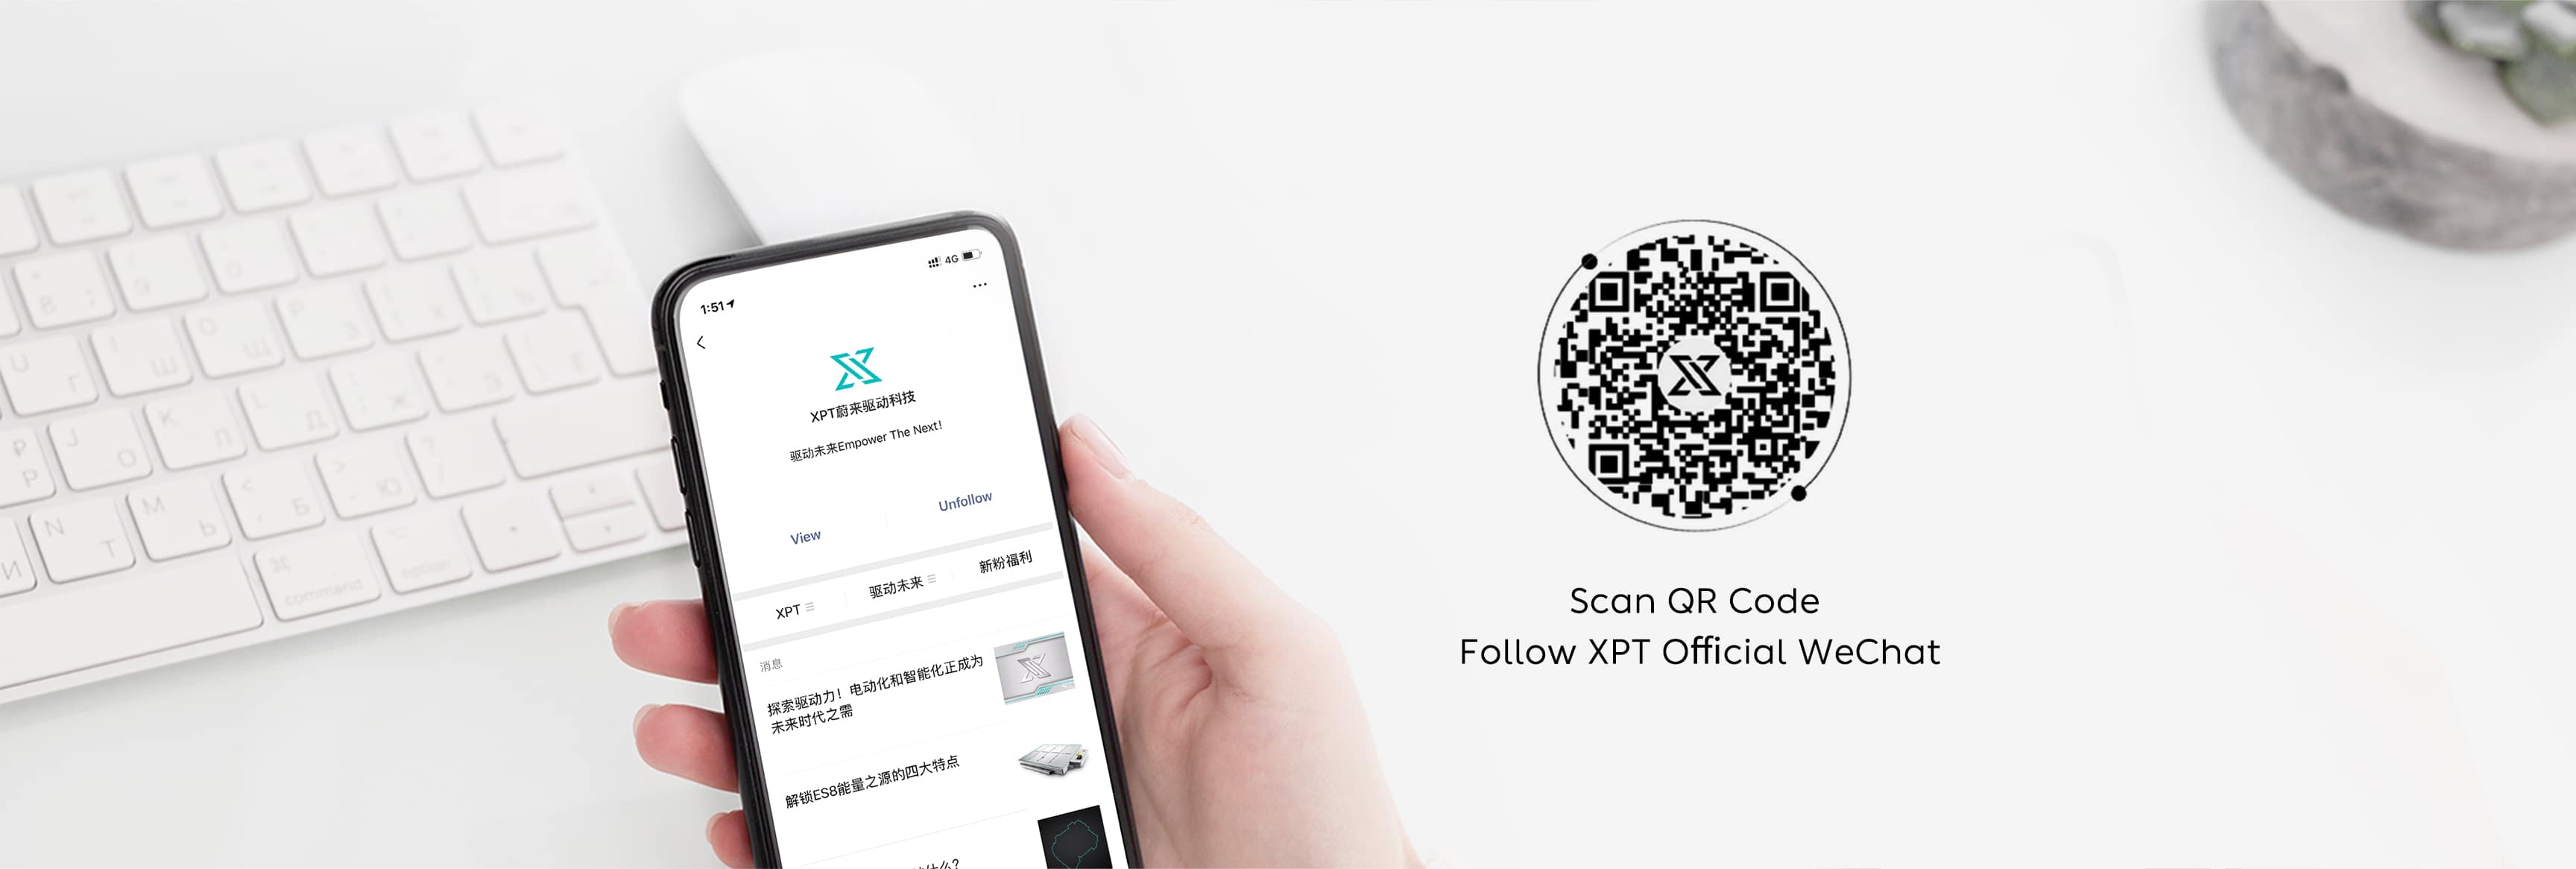 XPT Wechat Account